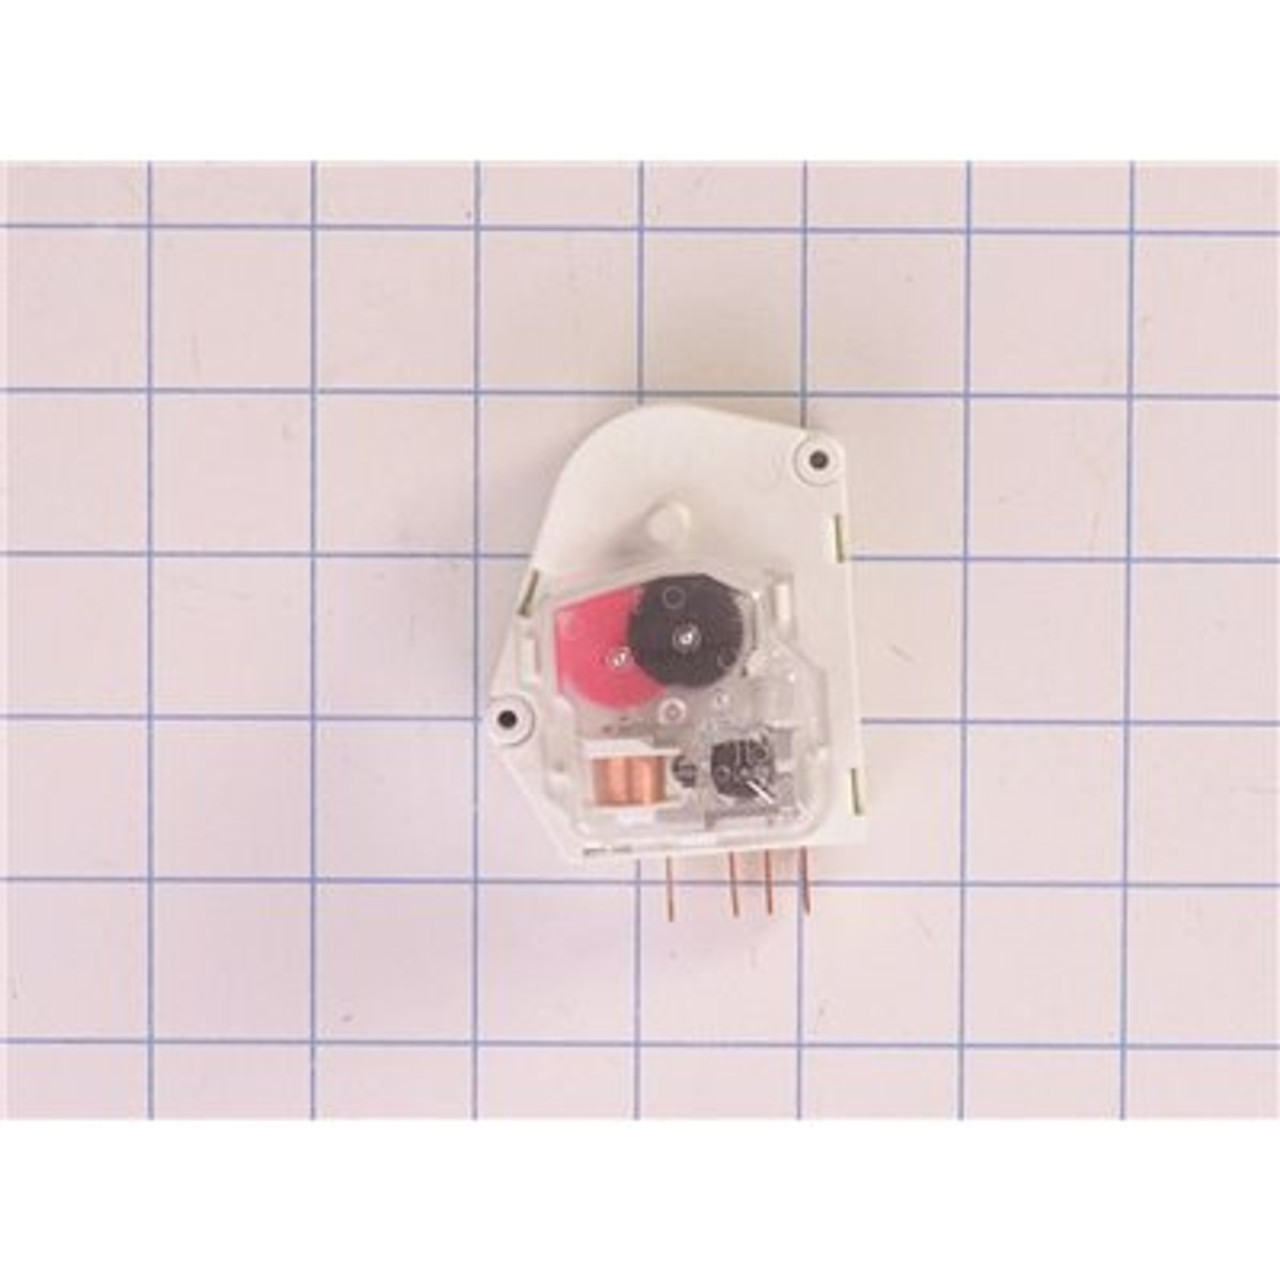 ELECTROLUX Replacement Timer Defrost For Refrigerator, Part #241705102